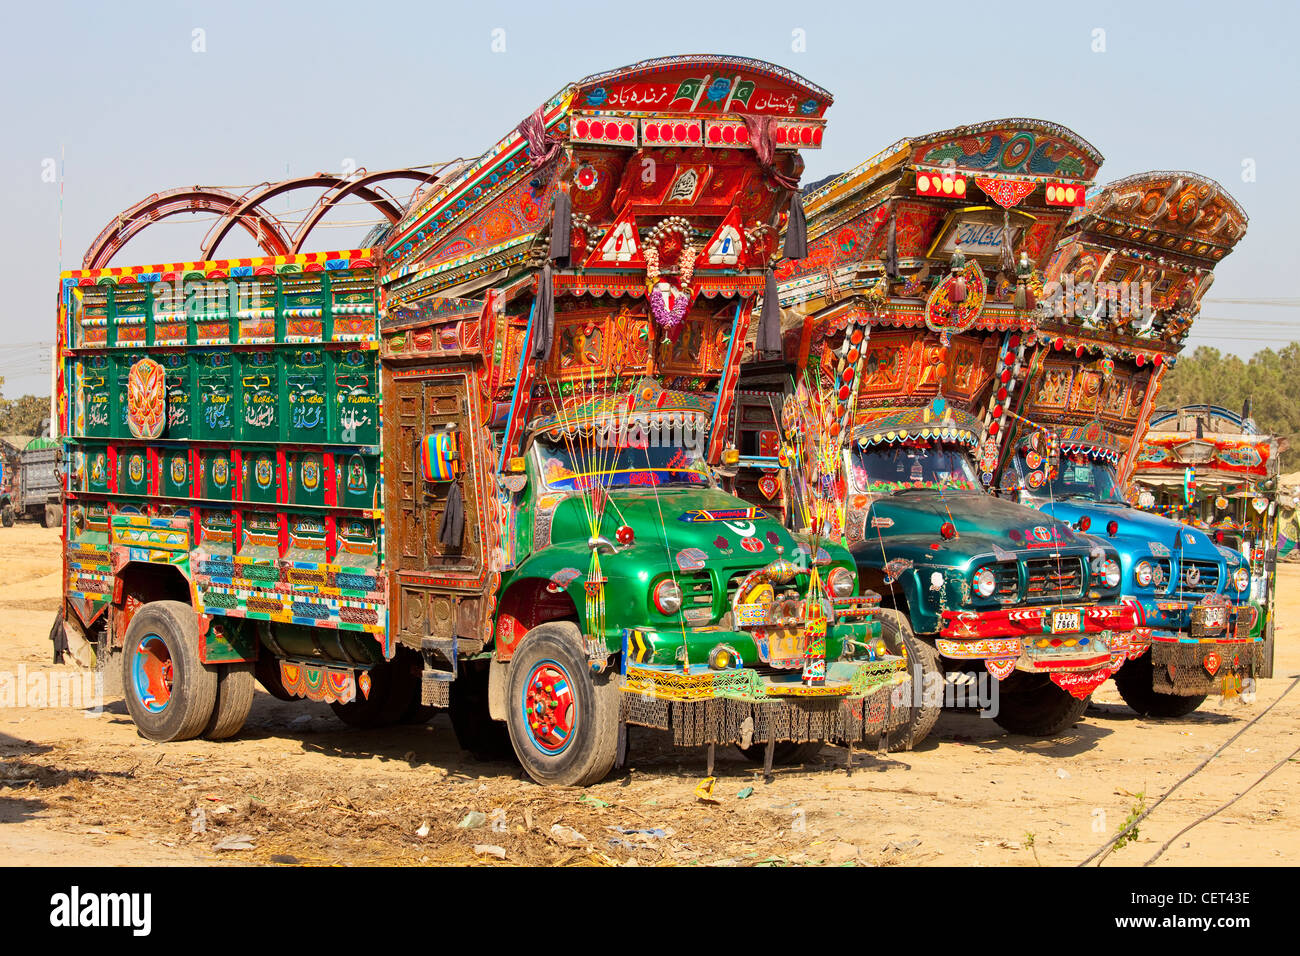 Brightly colored trucks in Islamabad, Pakistan Stock Photo